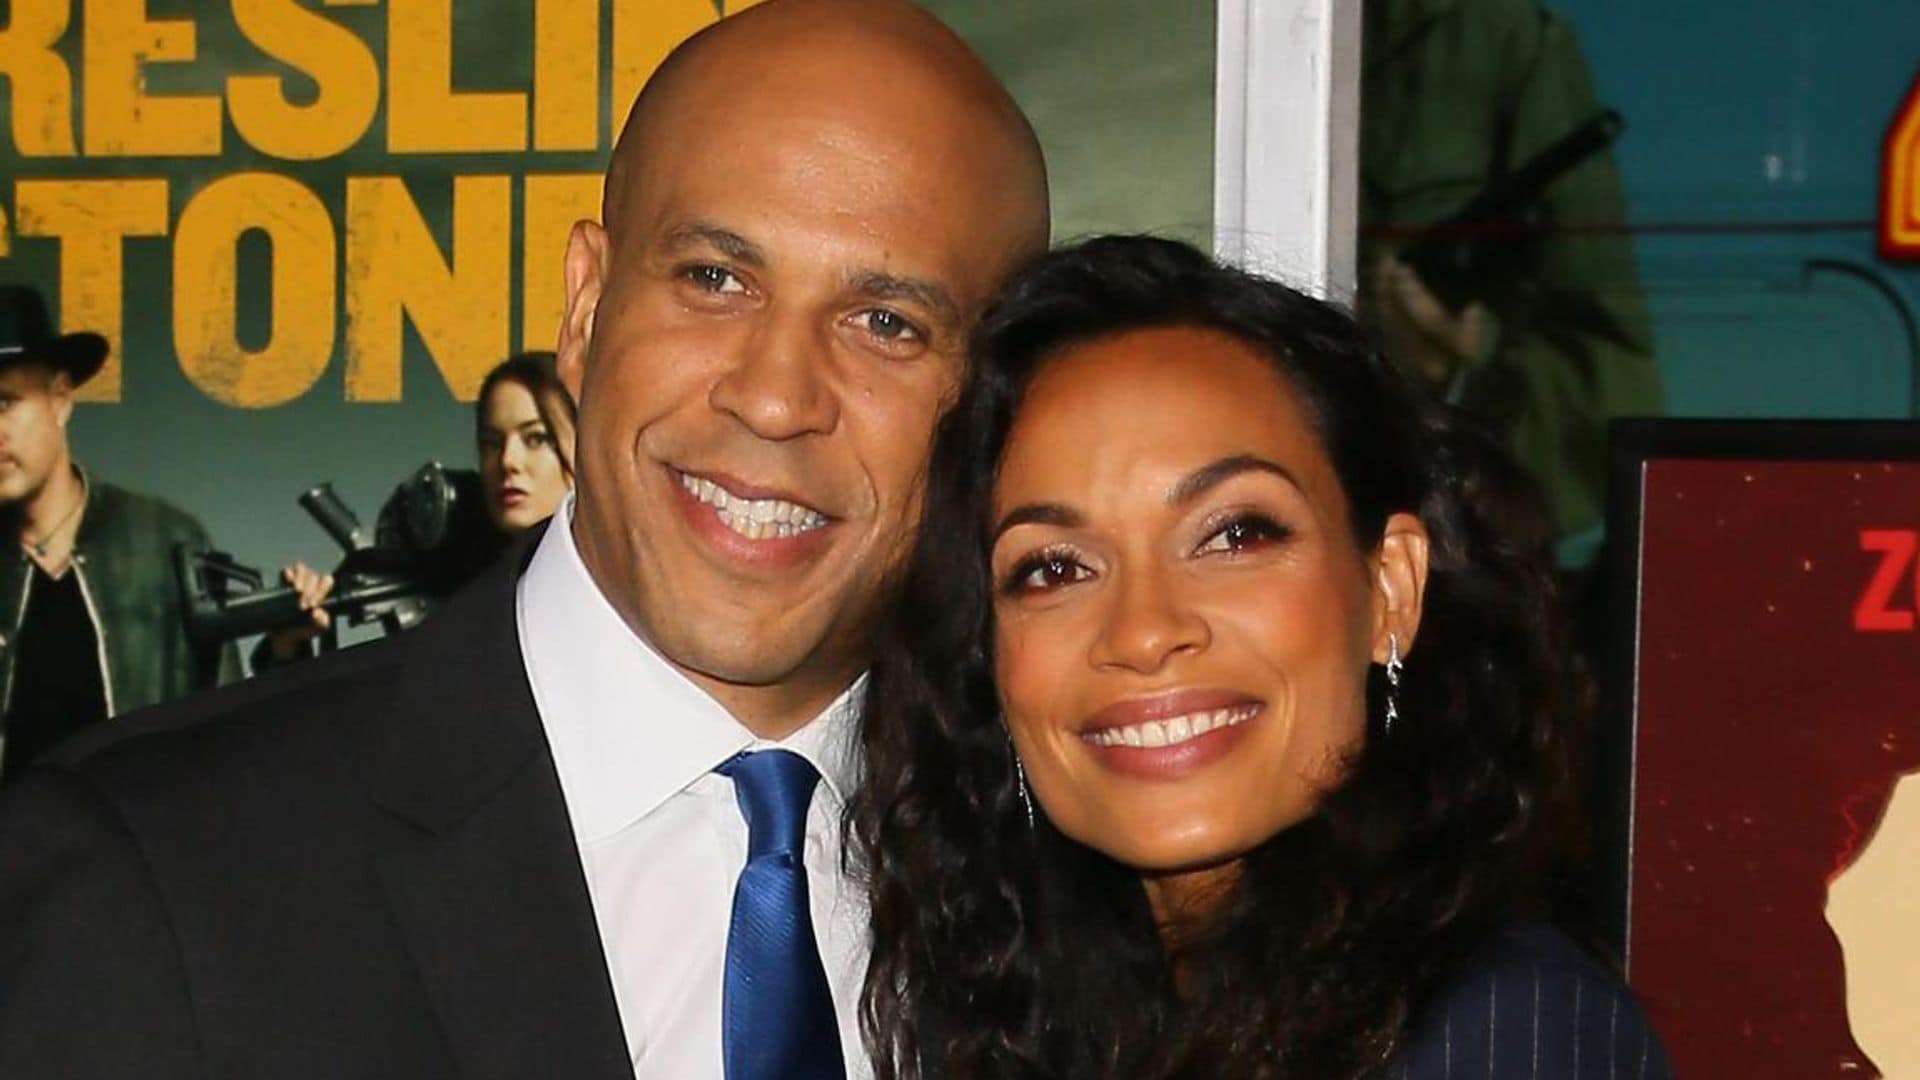 Rosario Dawson supports boyfriend Cory Booker after dropping from presidential race